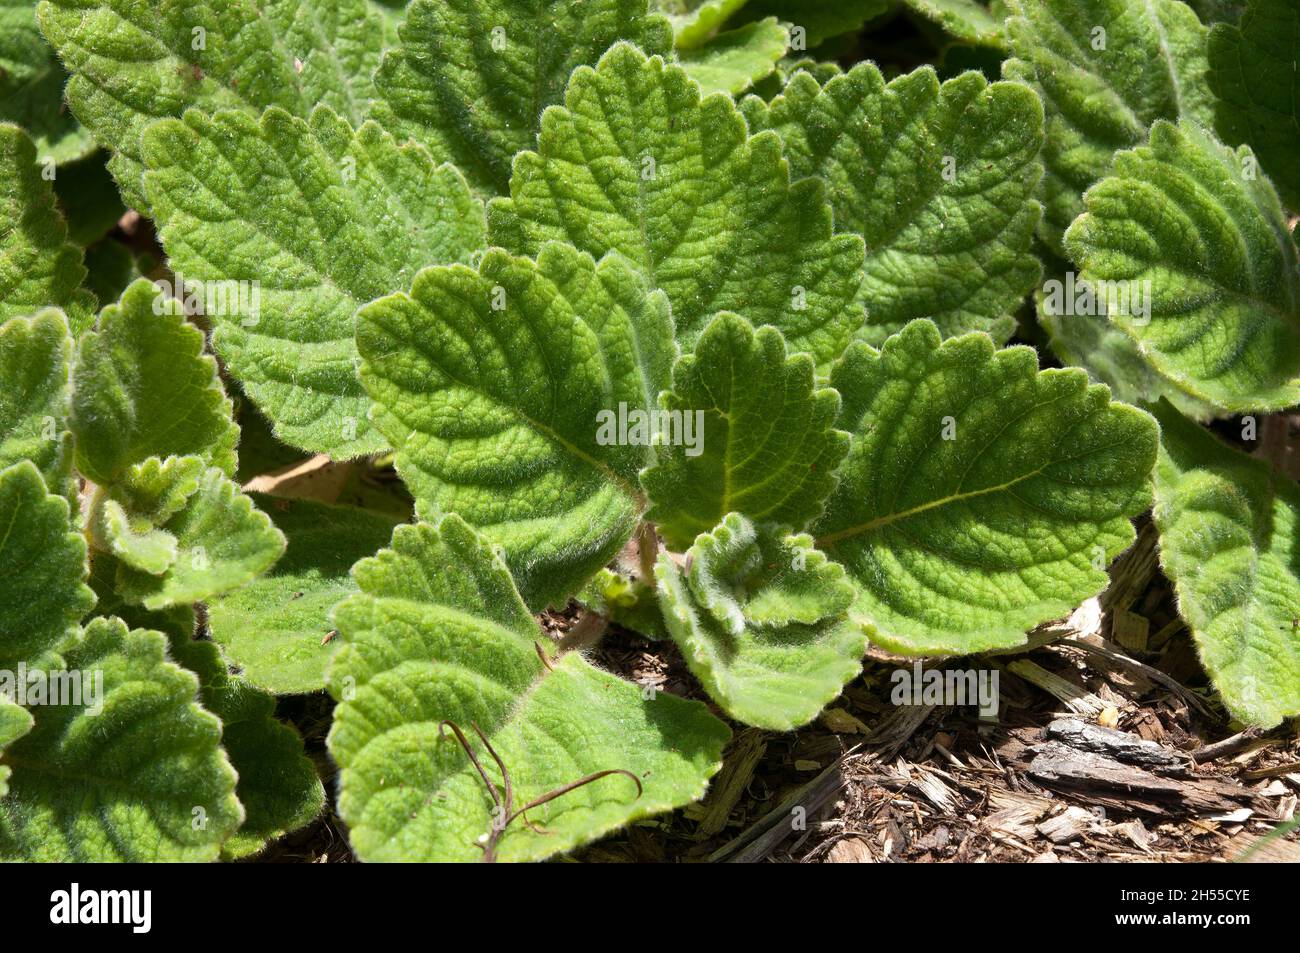 Sydney Australia, leaves of a plectranthus hadiensis ground cover in the sunshine Stock Photo